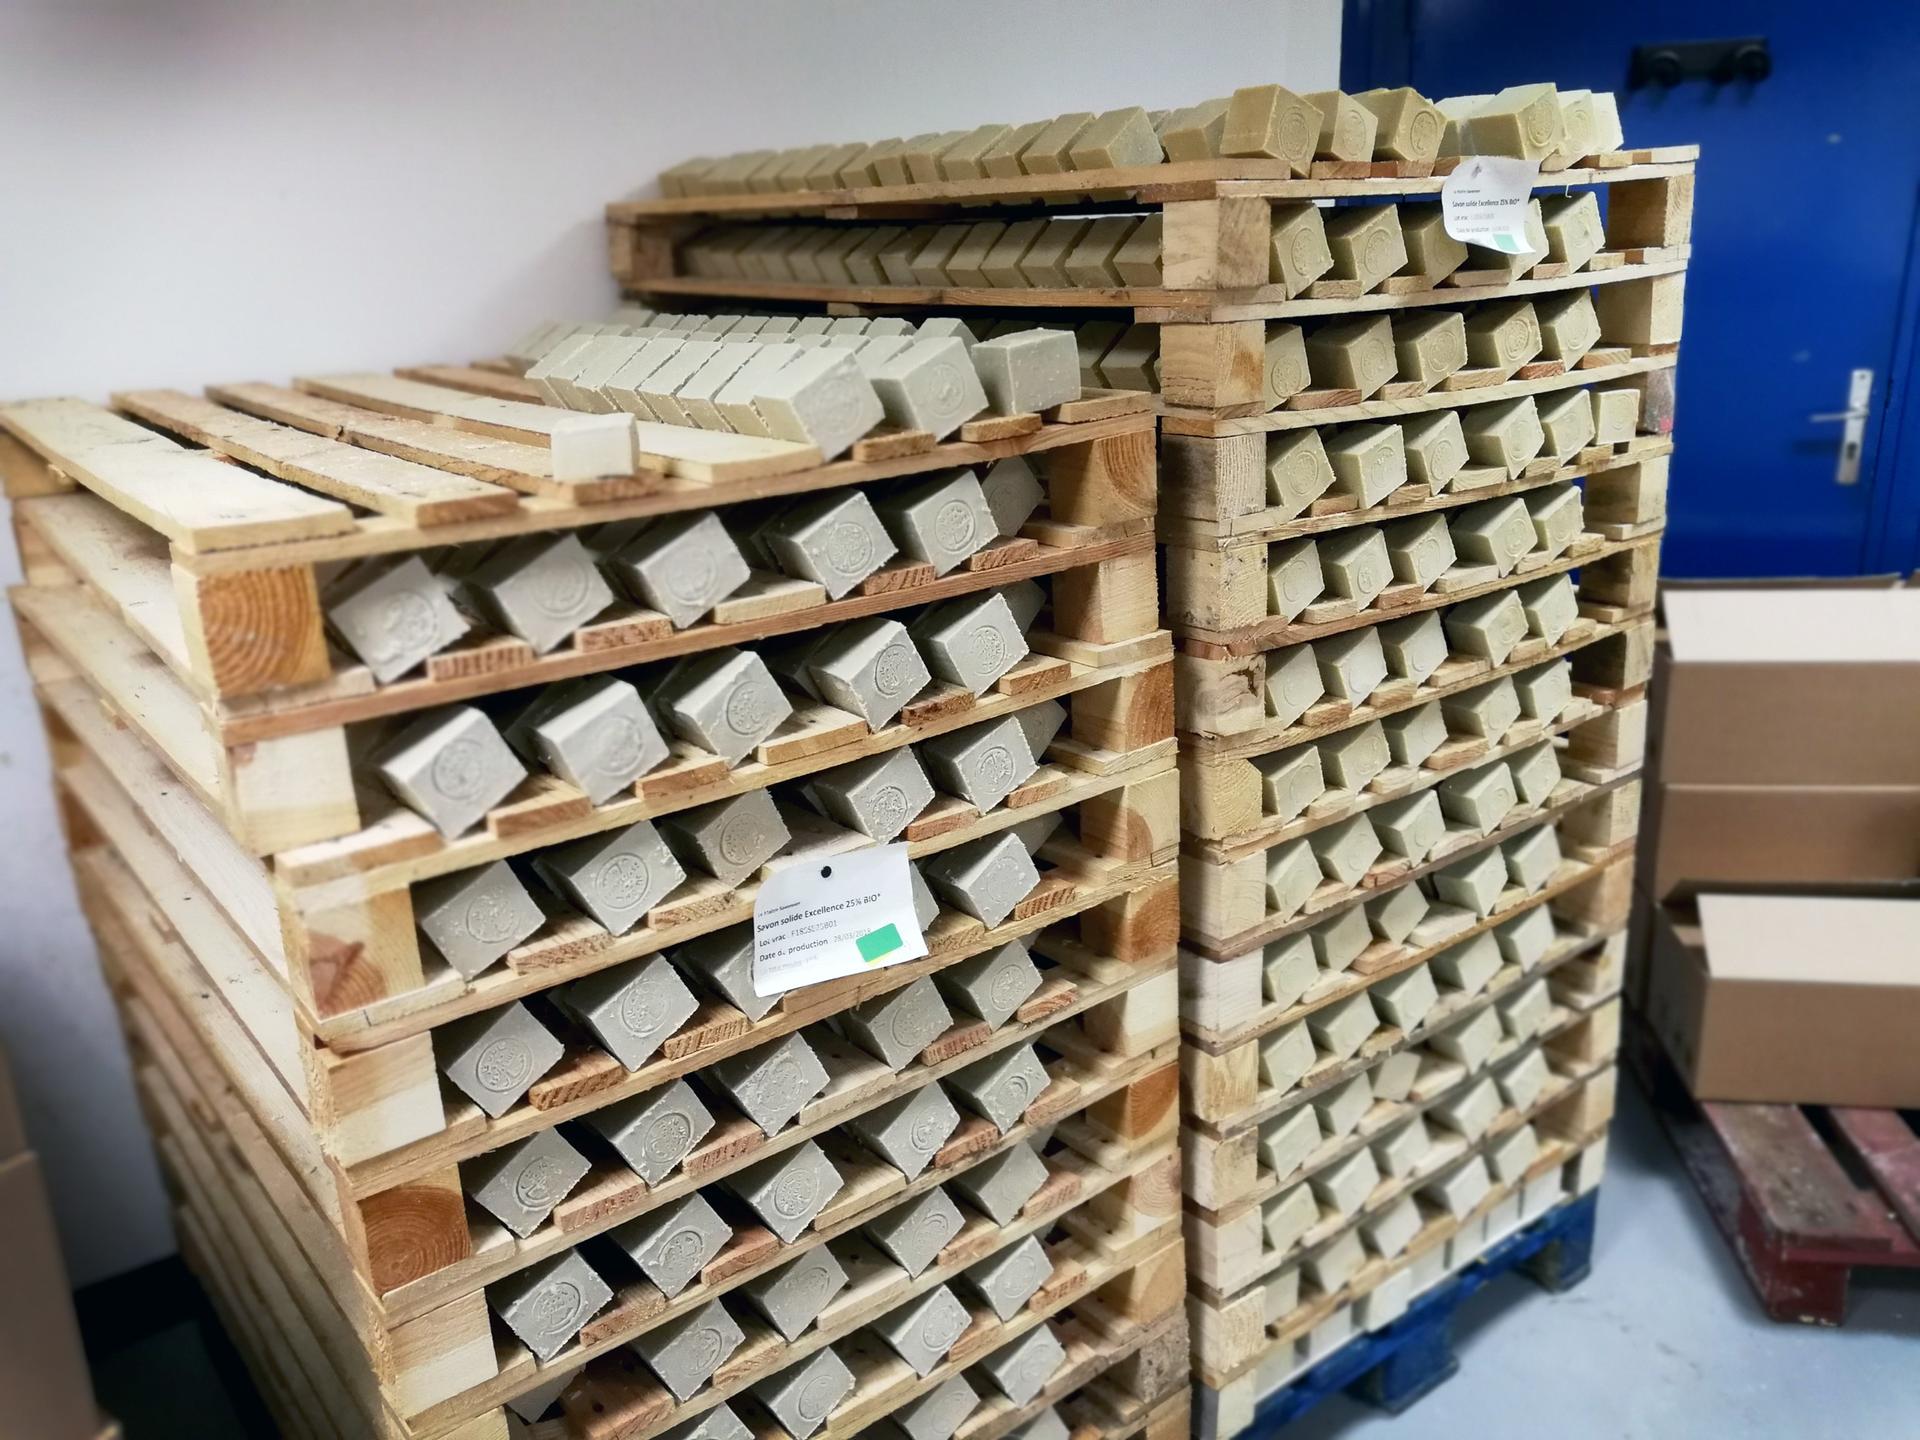 Rows of greenish-brown soap sit on wooden racks